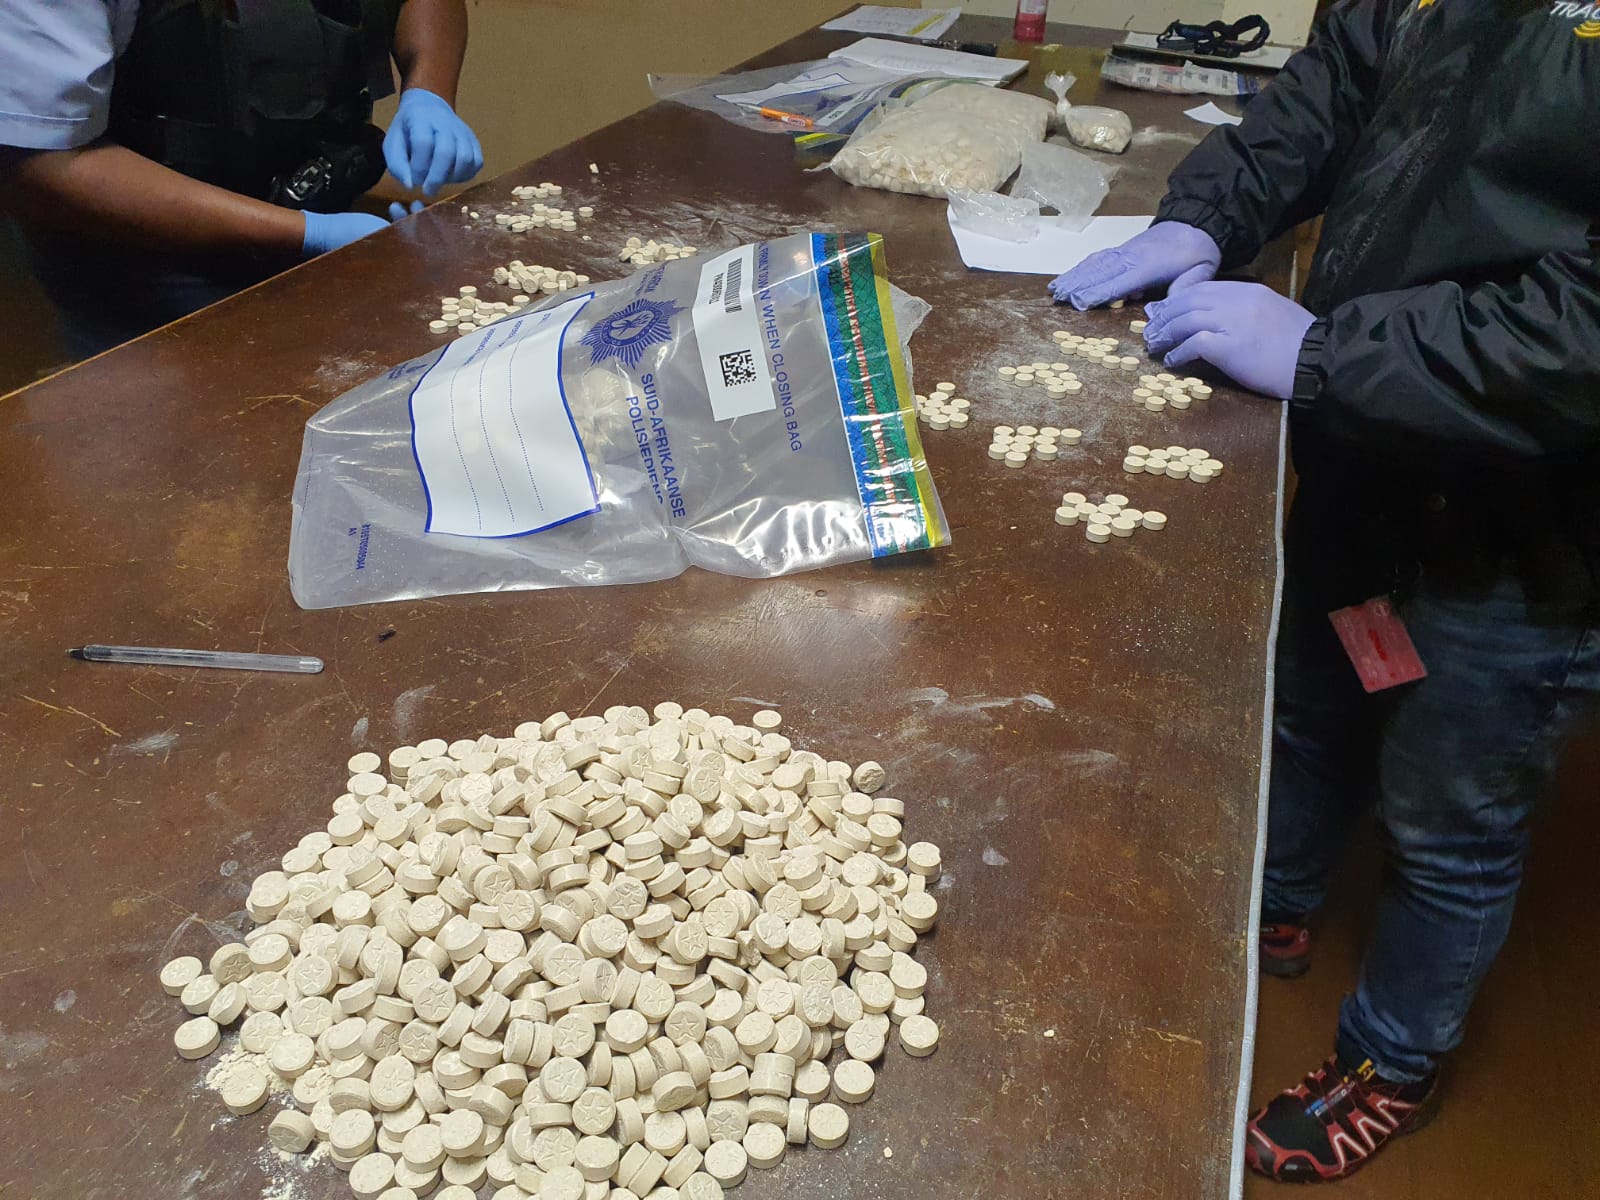 Vehicle intercepted and drug arrest made on the N11 Road in Ingogo